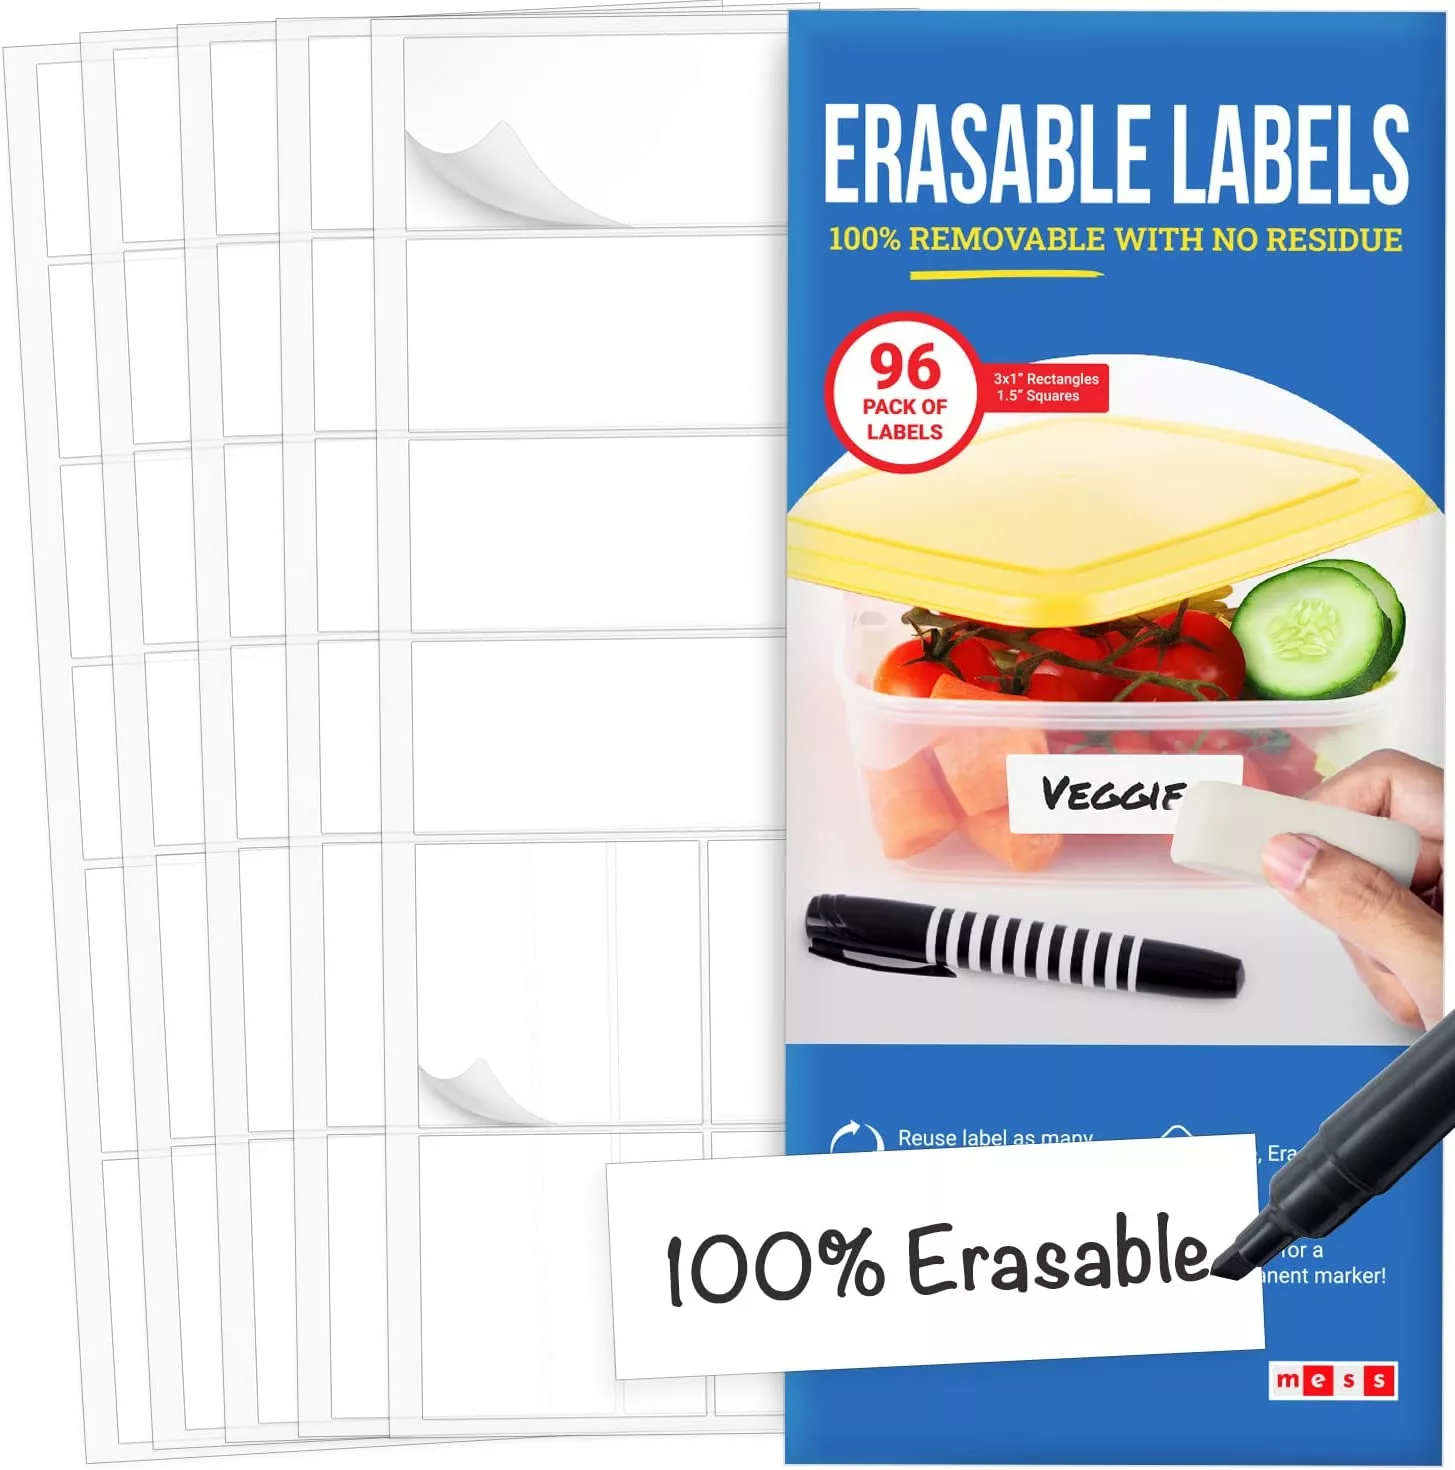  Erasable Food Labels 2-Pack Starter Kits With Pen & Erasers,  Reusable Label Multi-Color, Freezer, Microwave & Dishwasher Safe Kitchen  Tool for All-Purpose Meal Organization by Jokari: Home & Kitchen